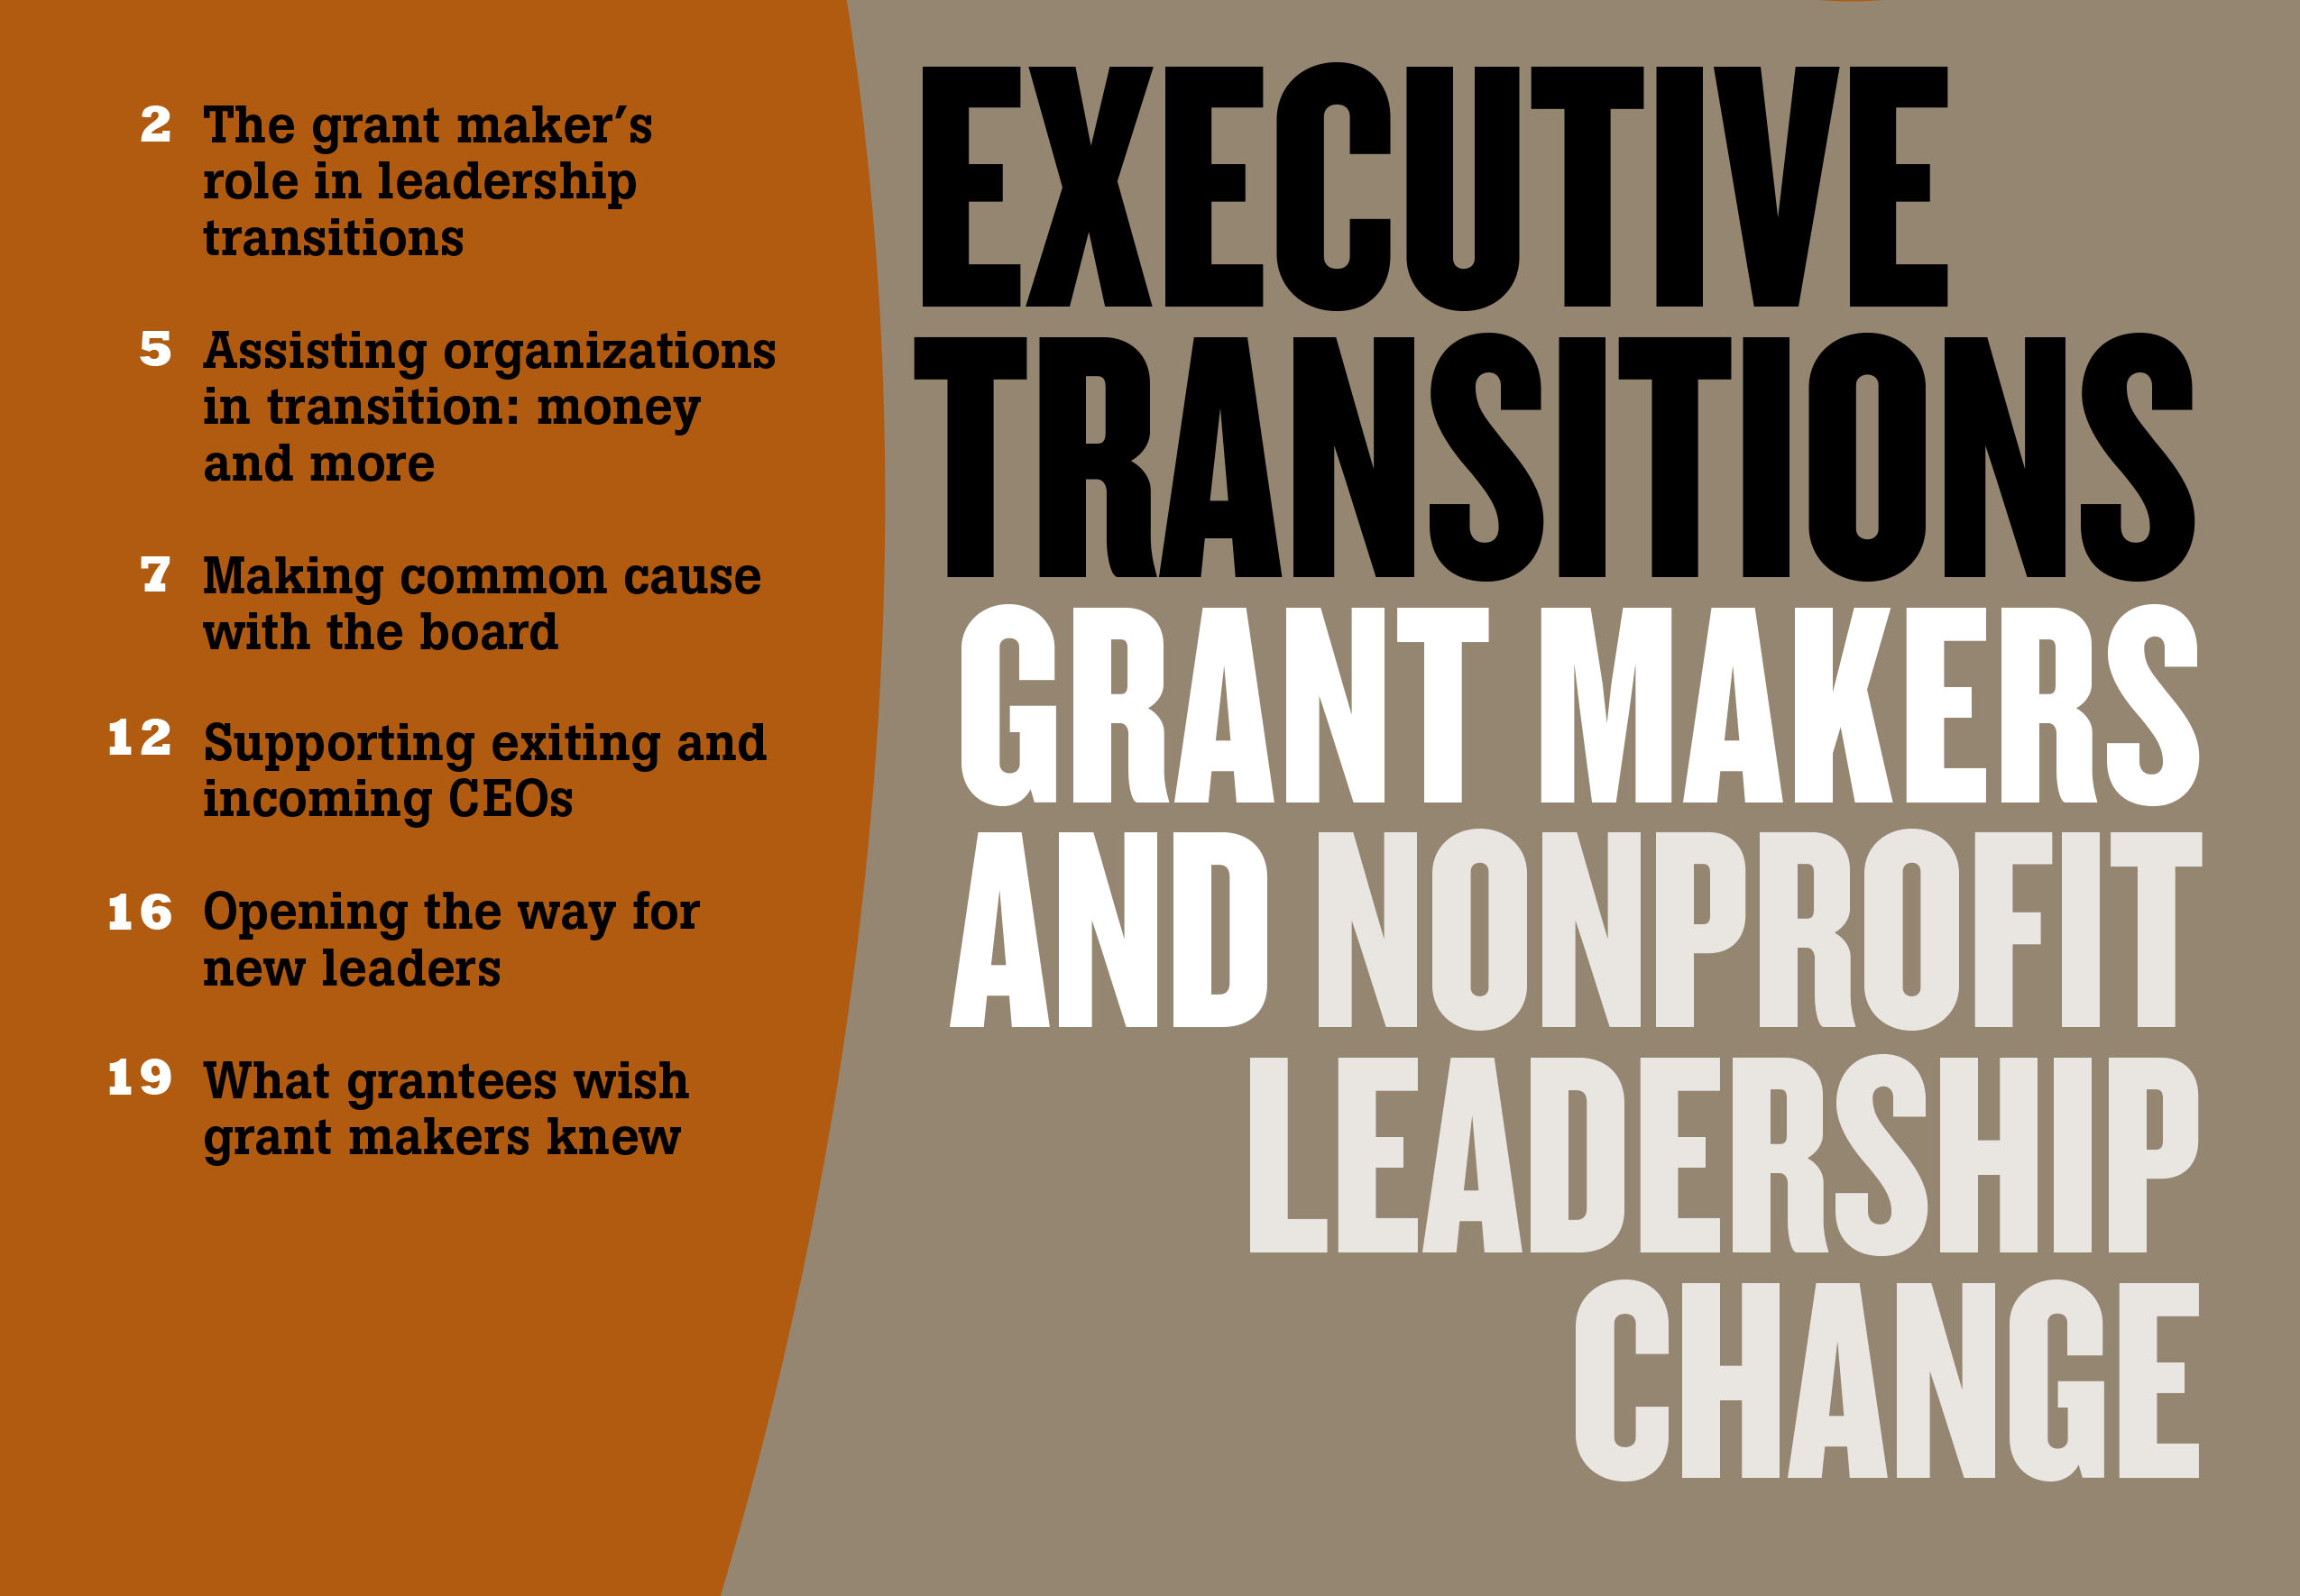 Executive Transitions